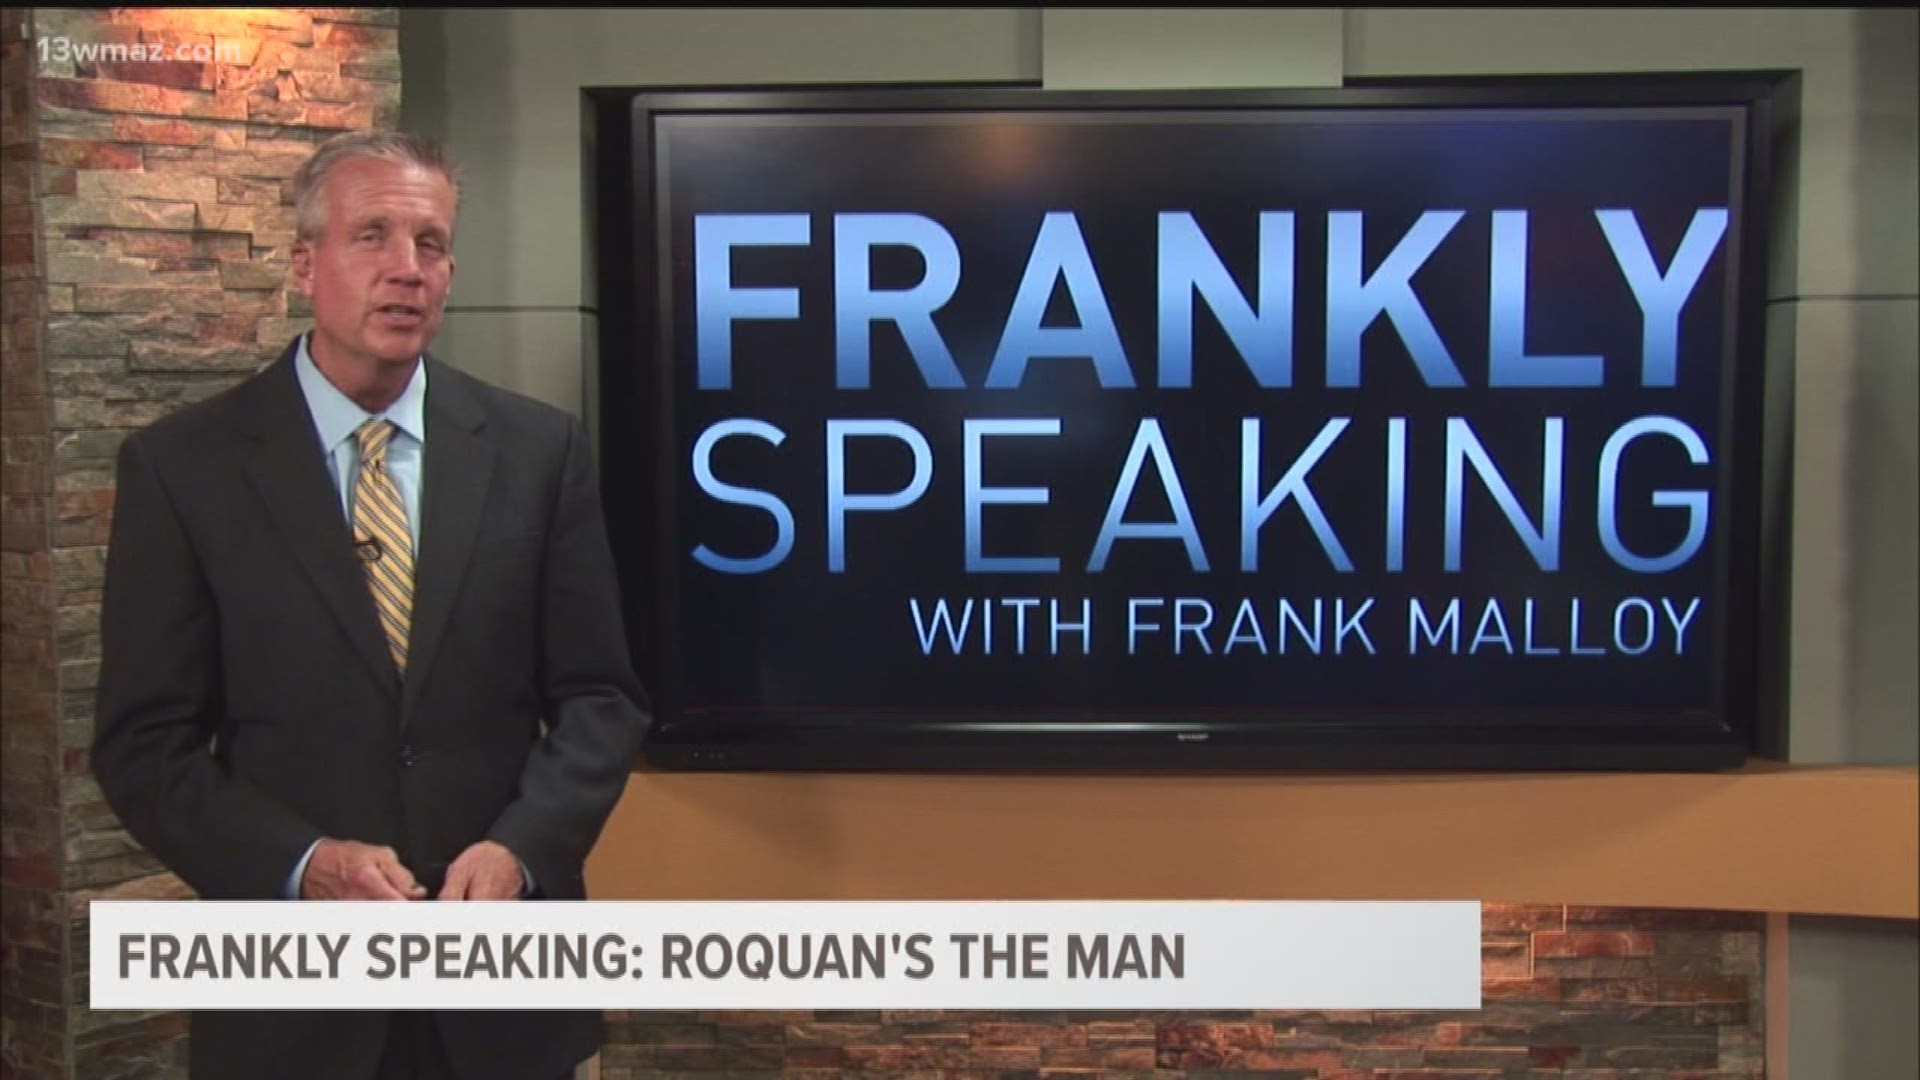 Frankly Speaking: Roquan's the Man